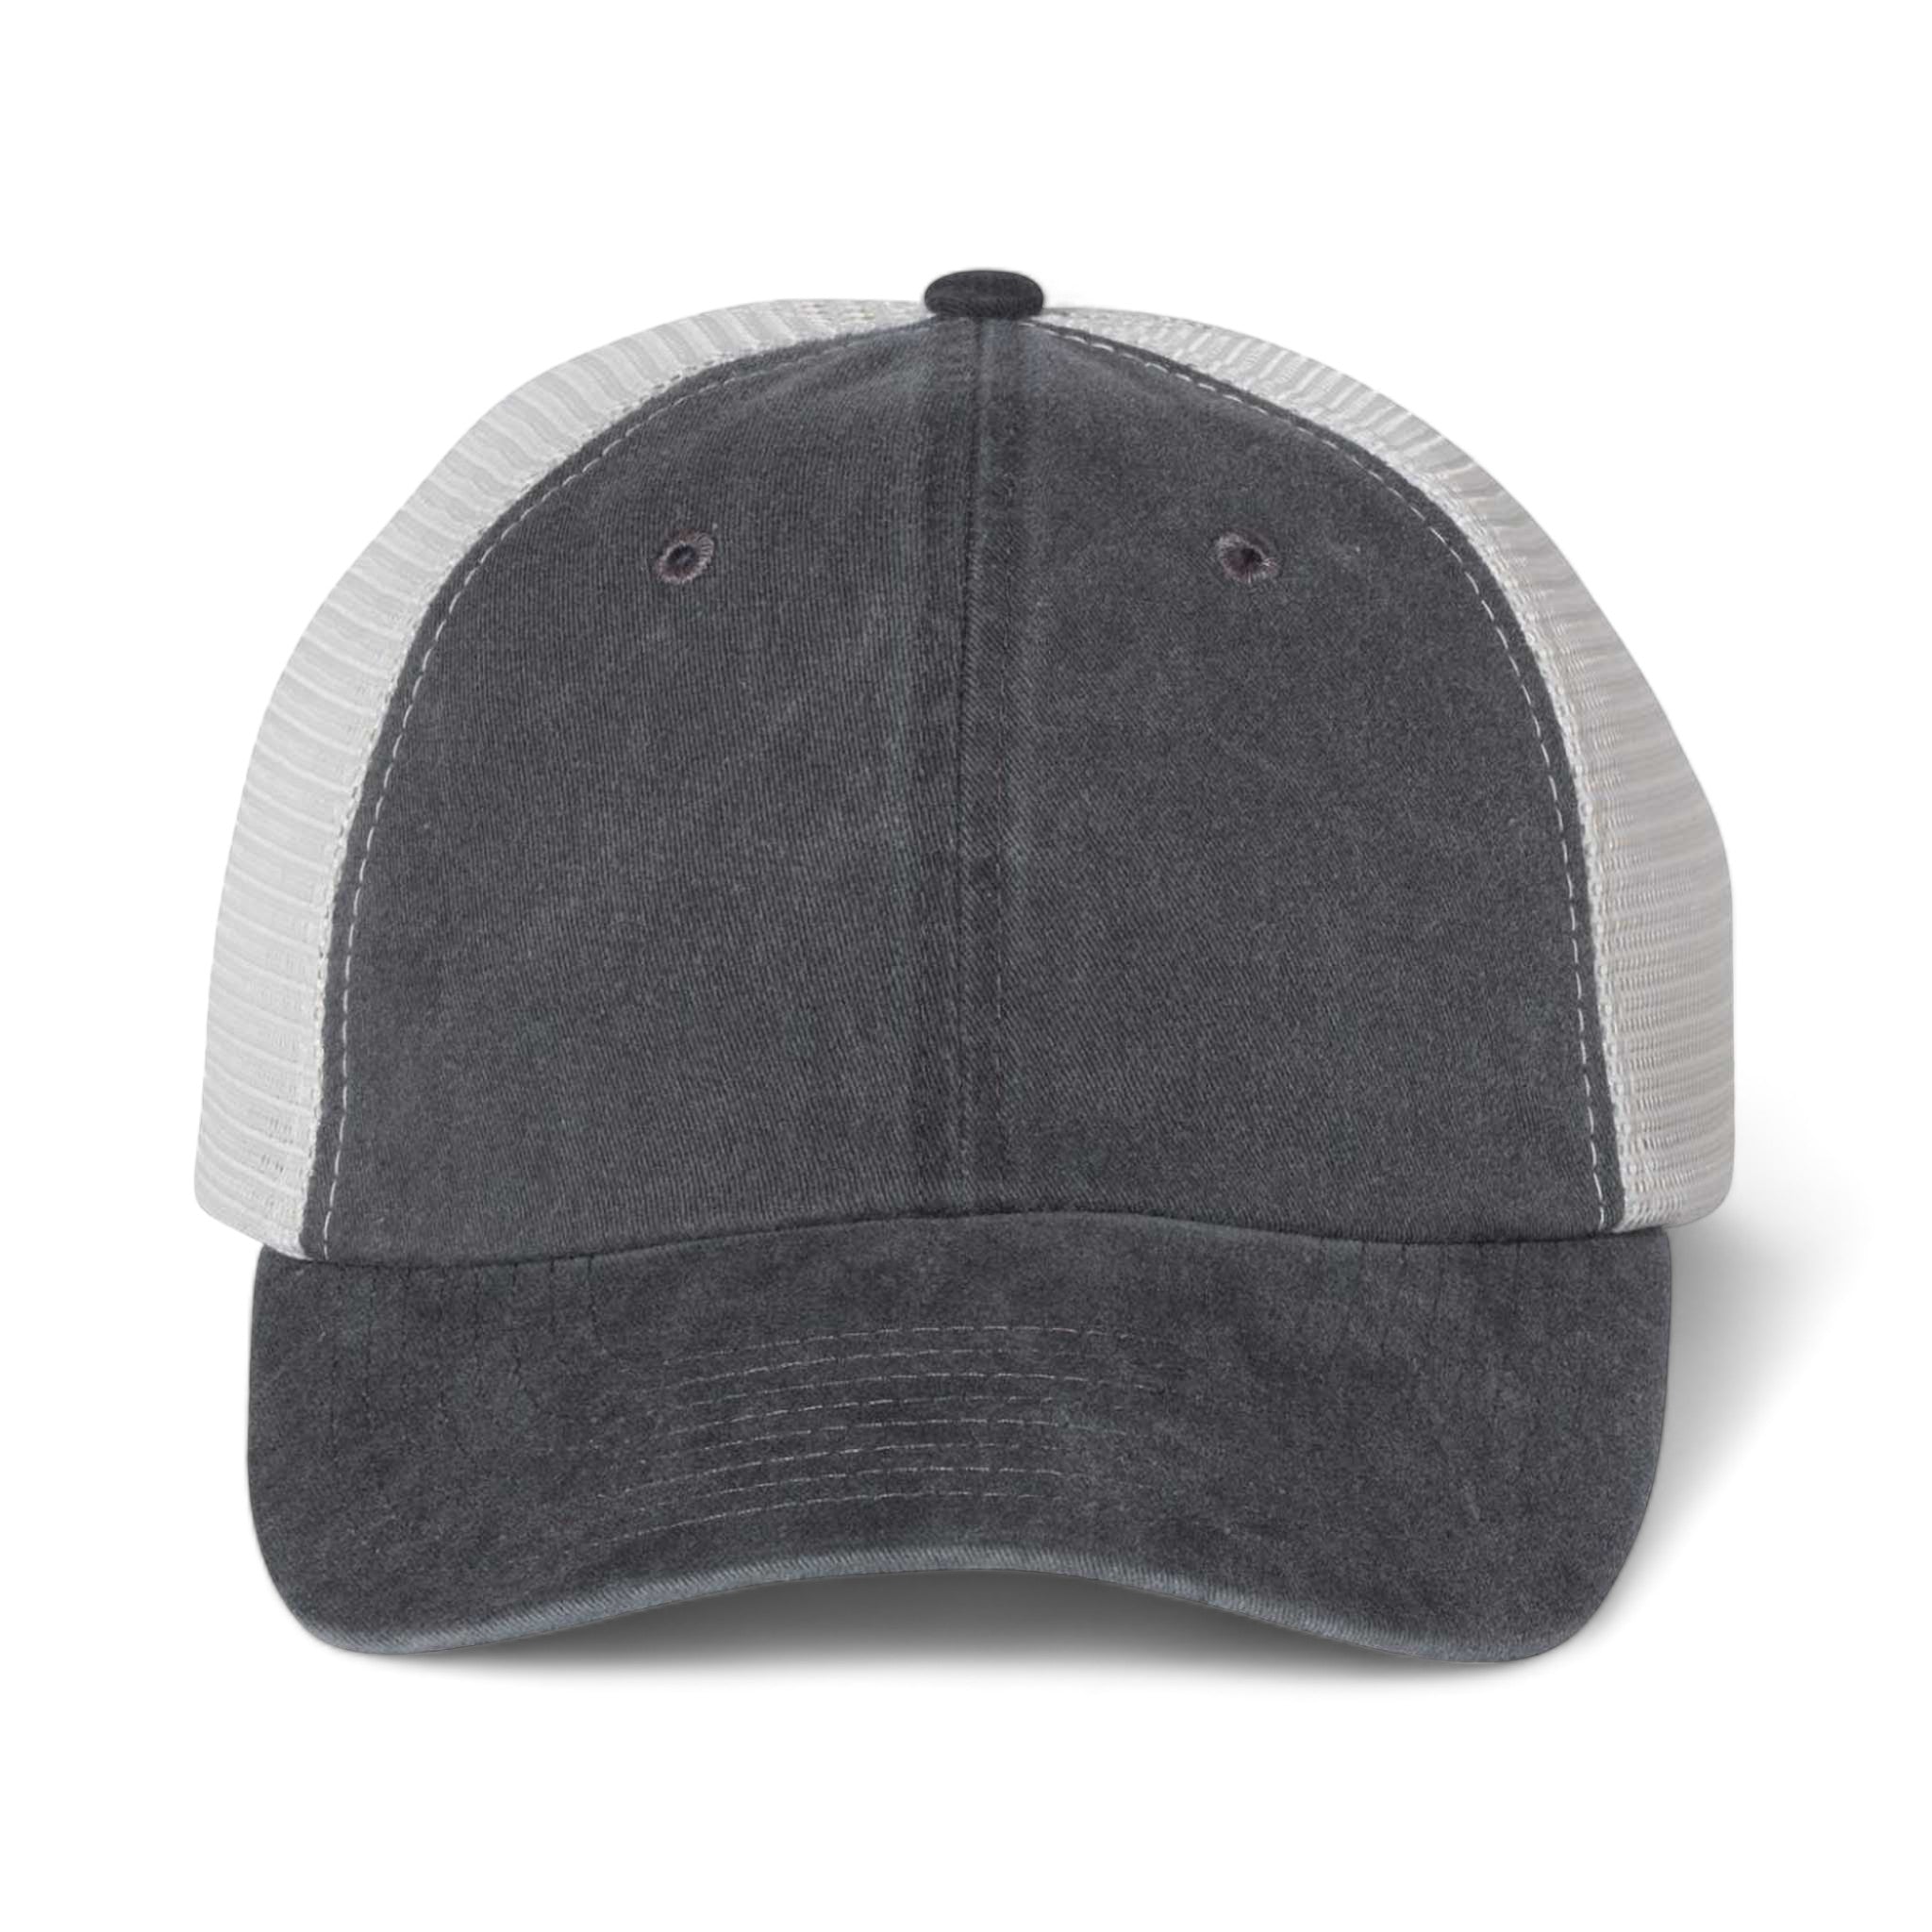 Front view of Sportsman SP510 custom hat in black and stone